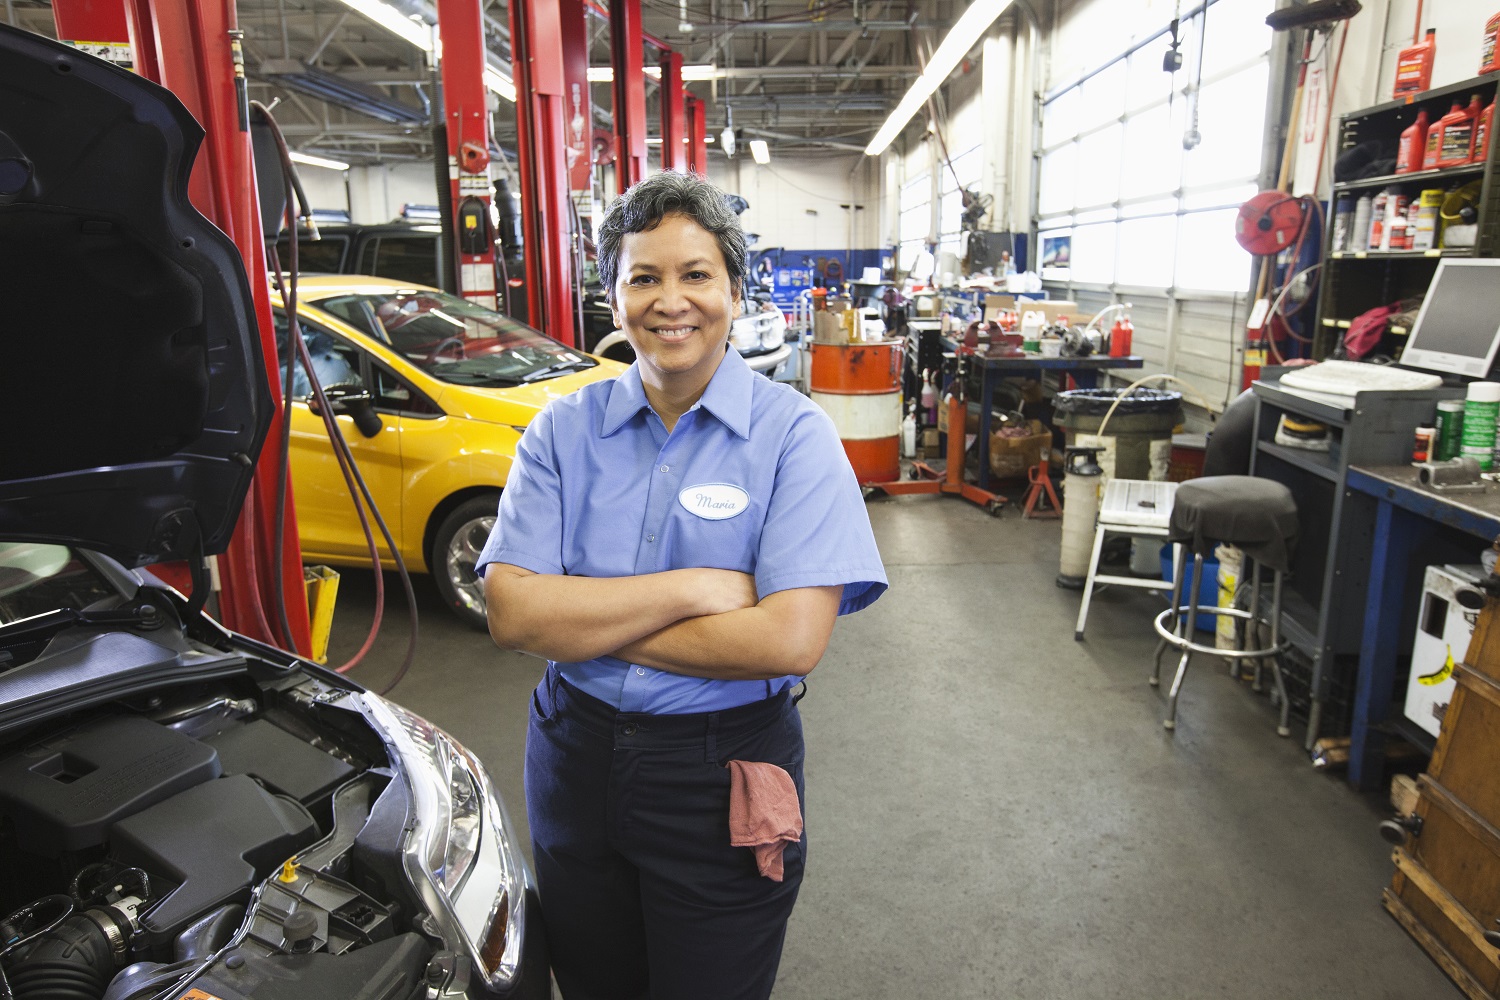 5 Things to Look for in an Auto Repair Shop